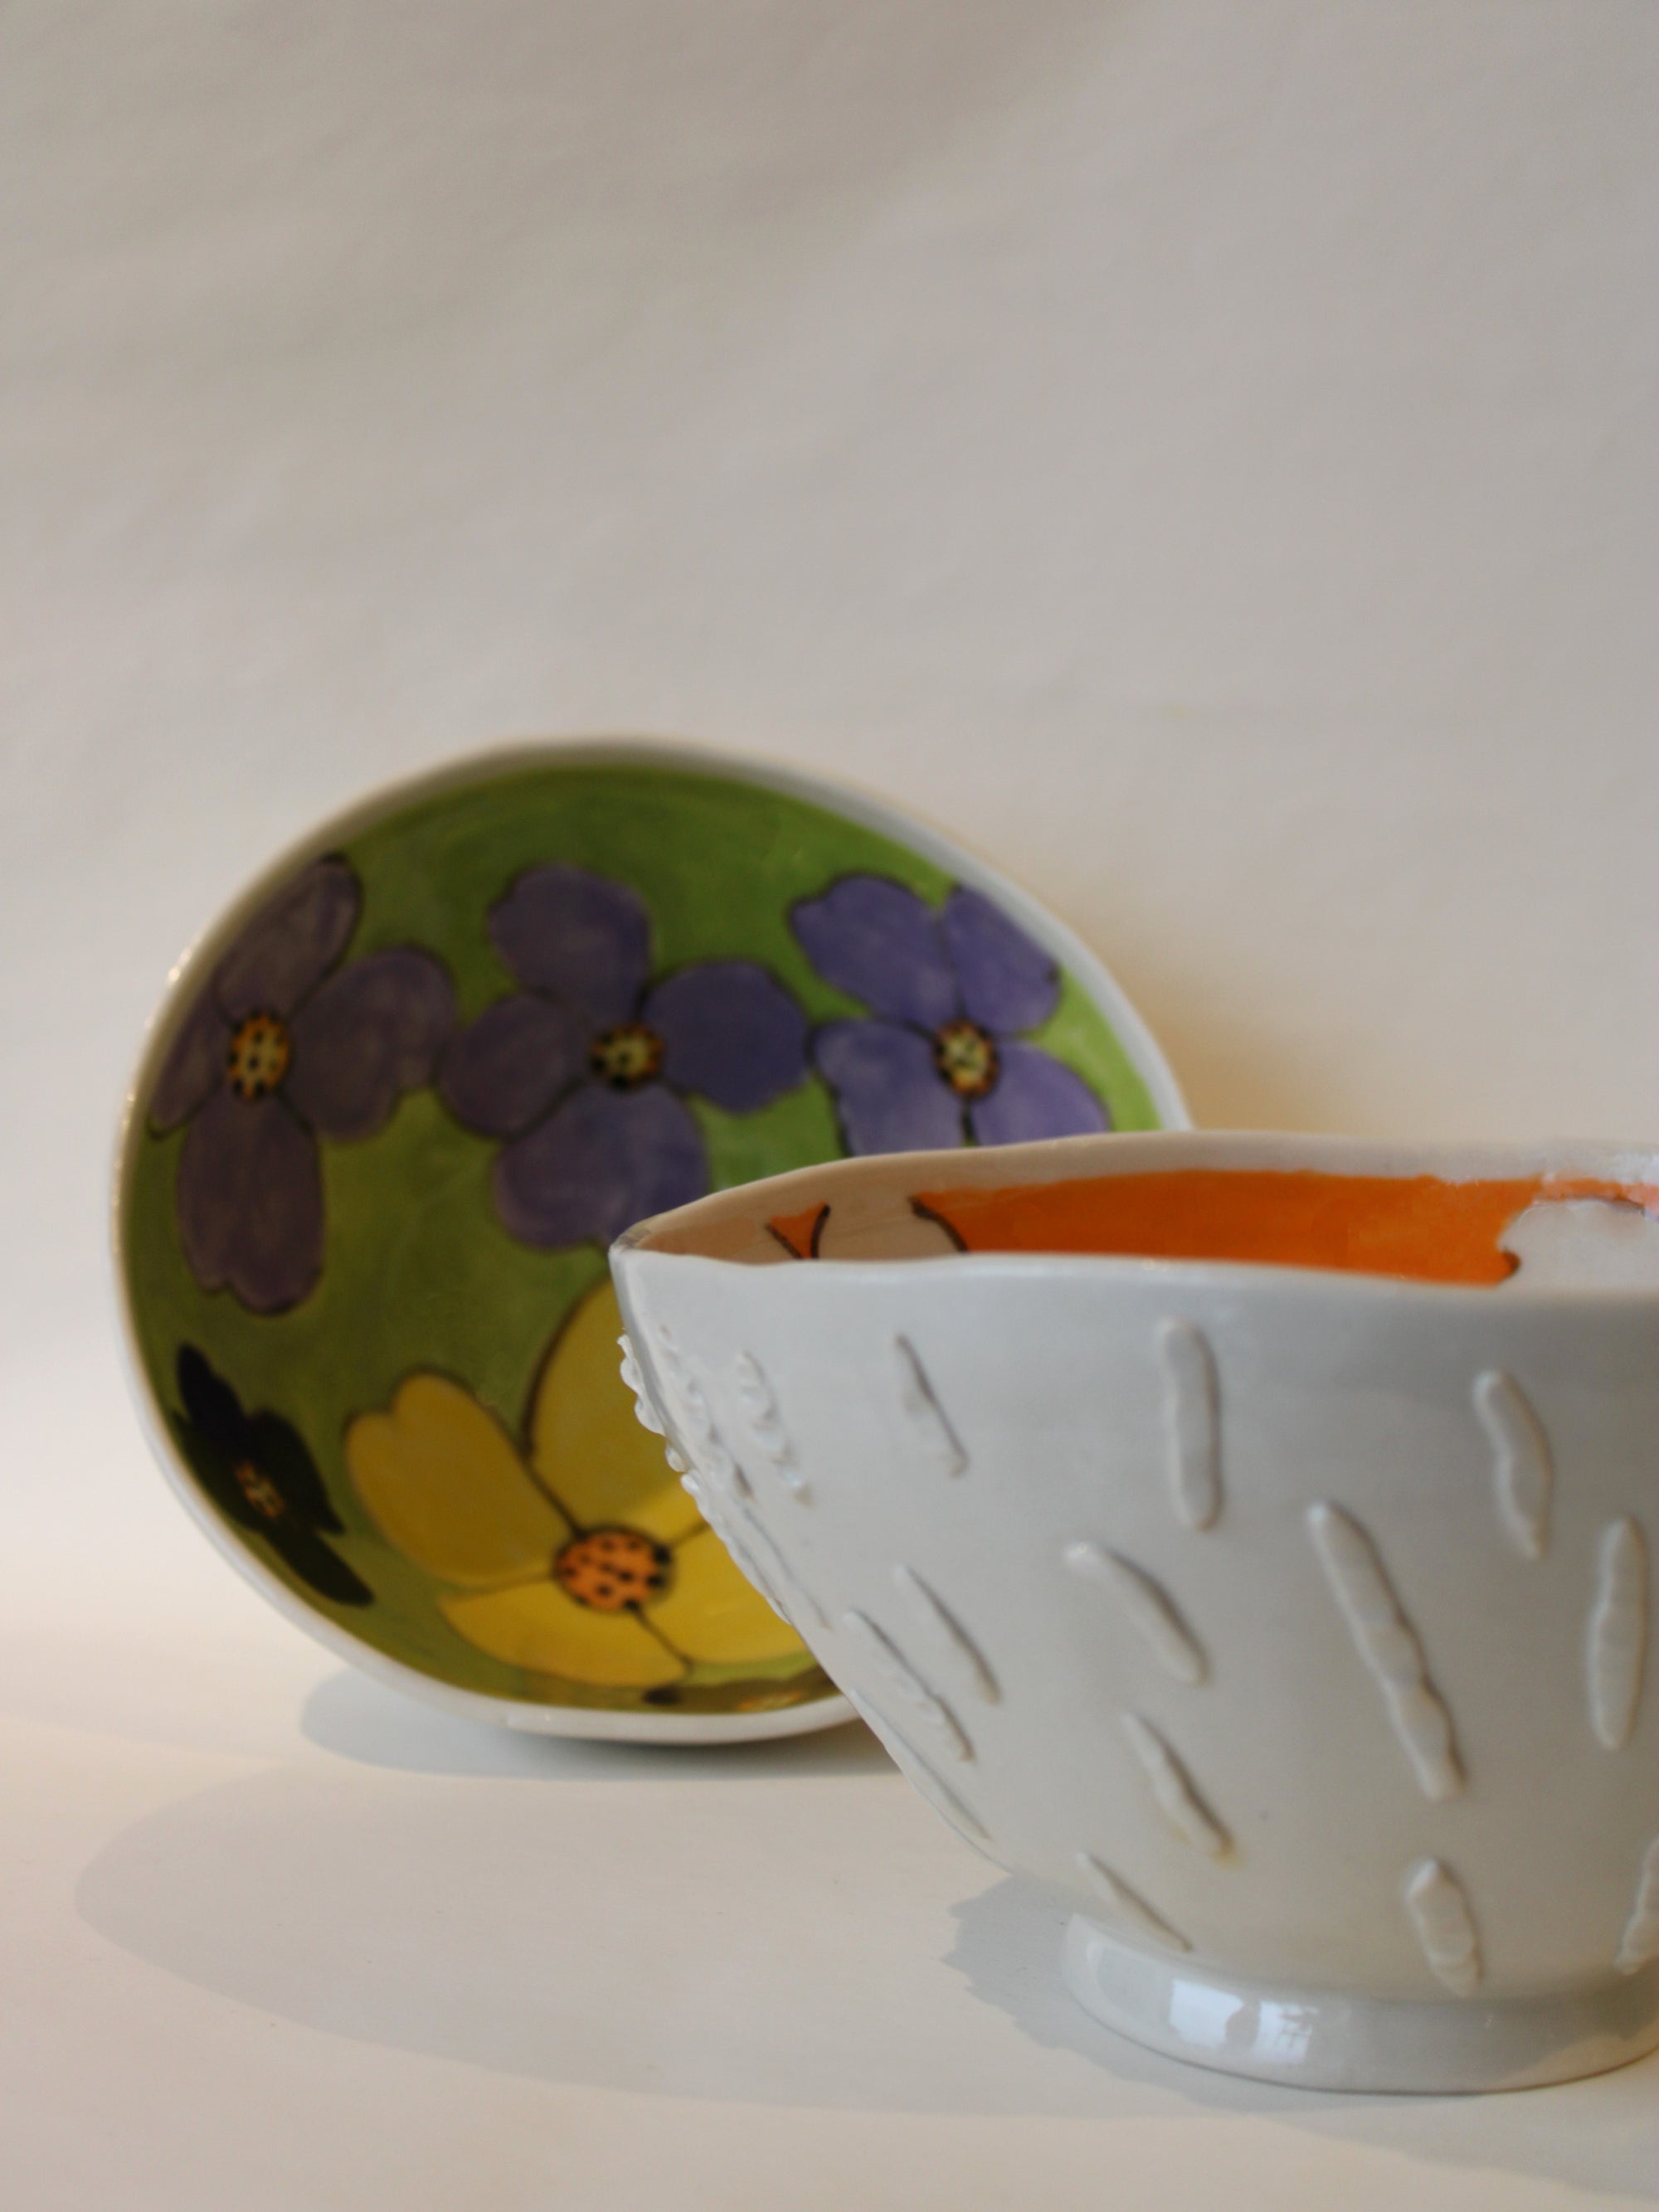 White Porcelain Bowl With Textured Exterior And Orange Inside With White Flowers